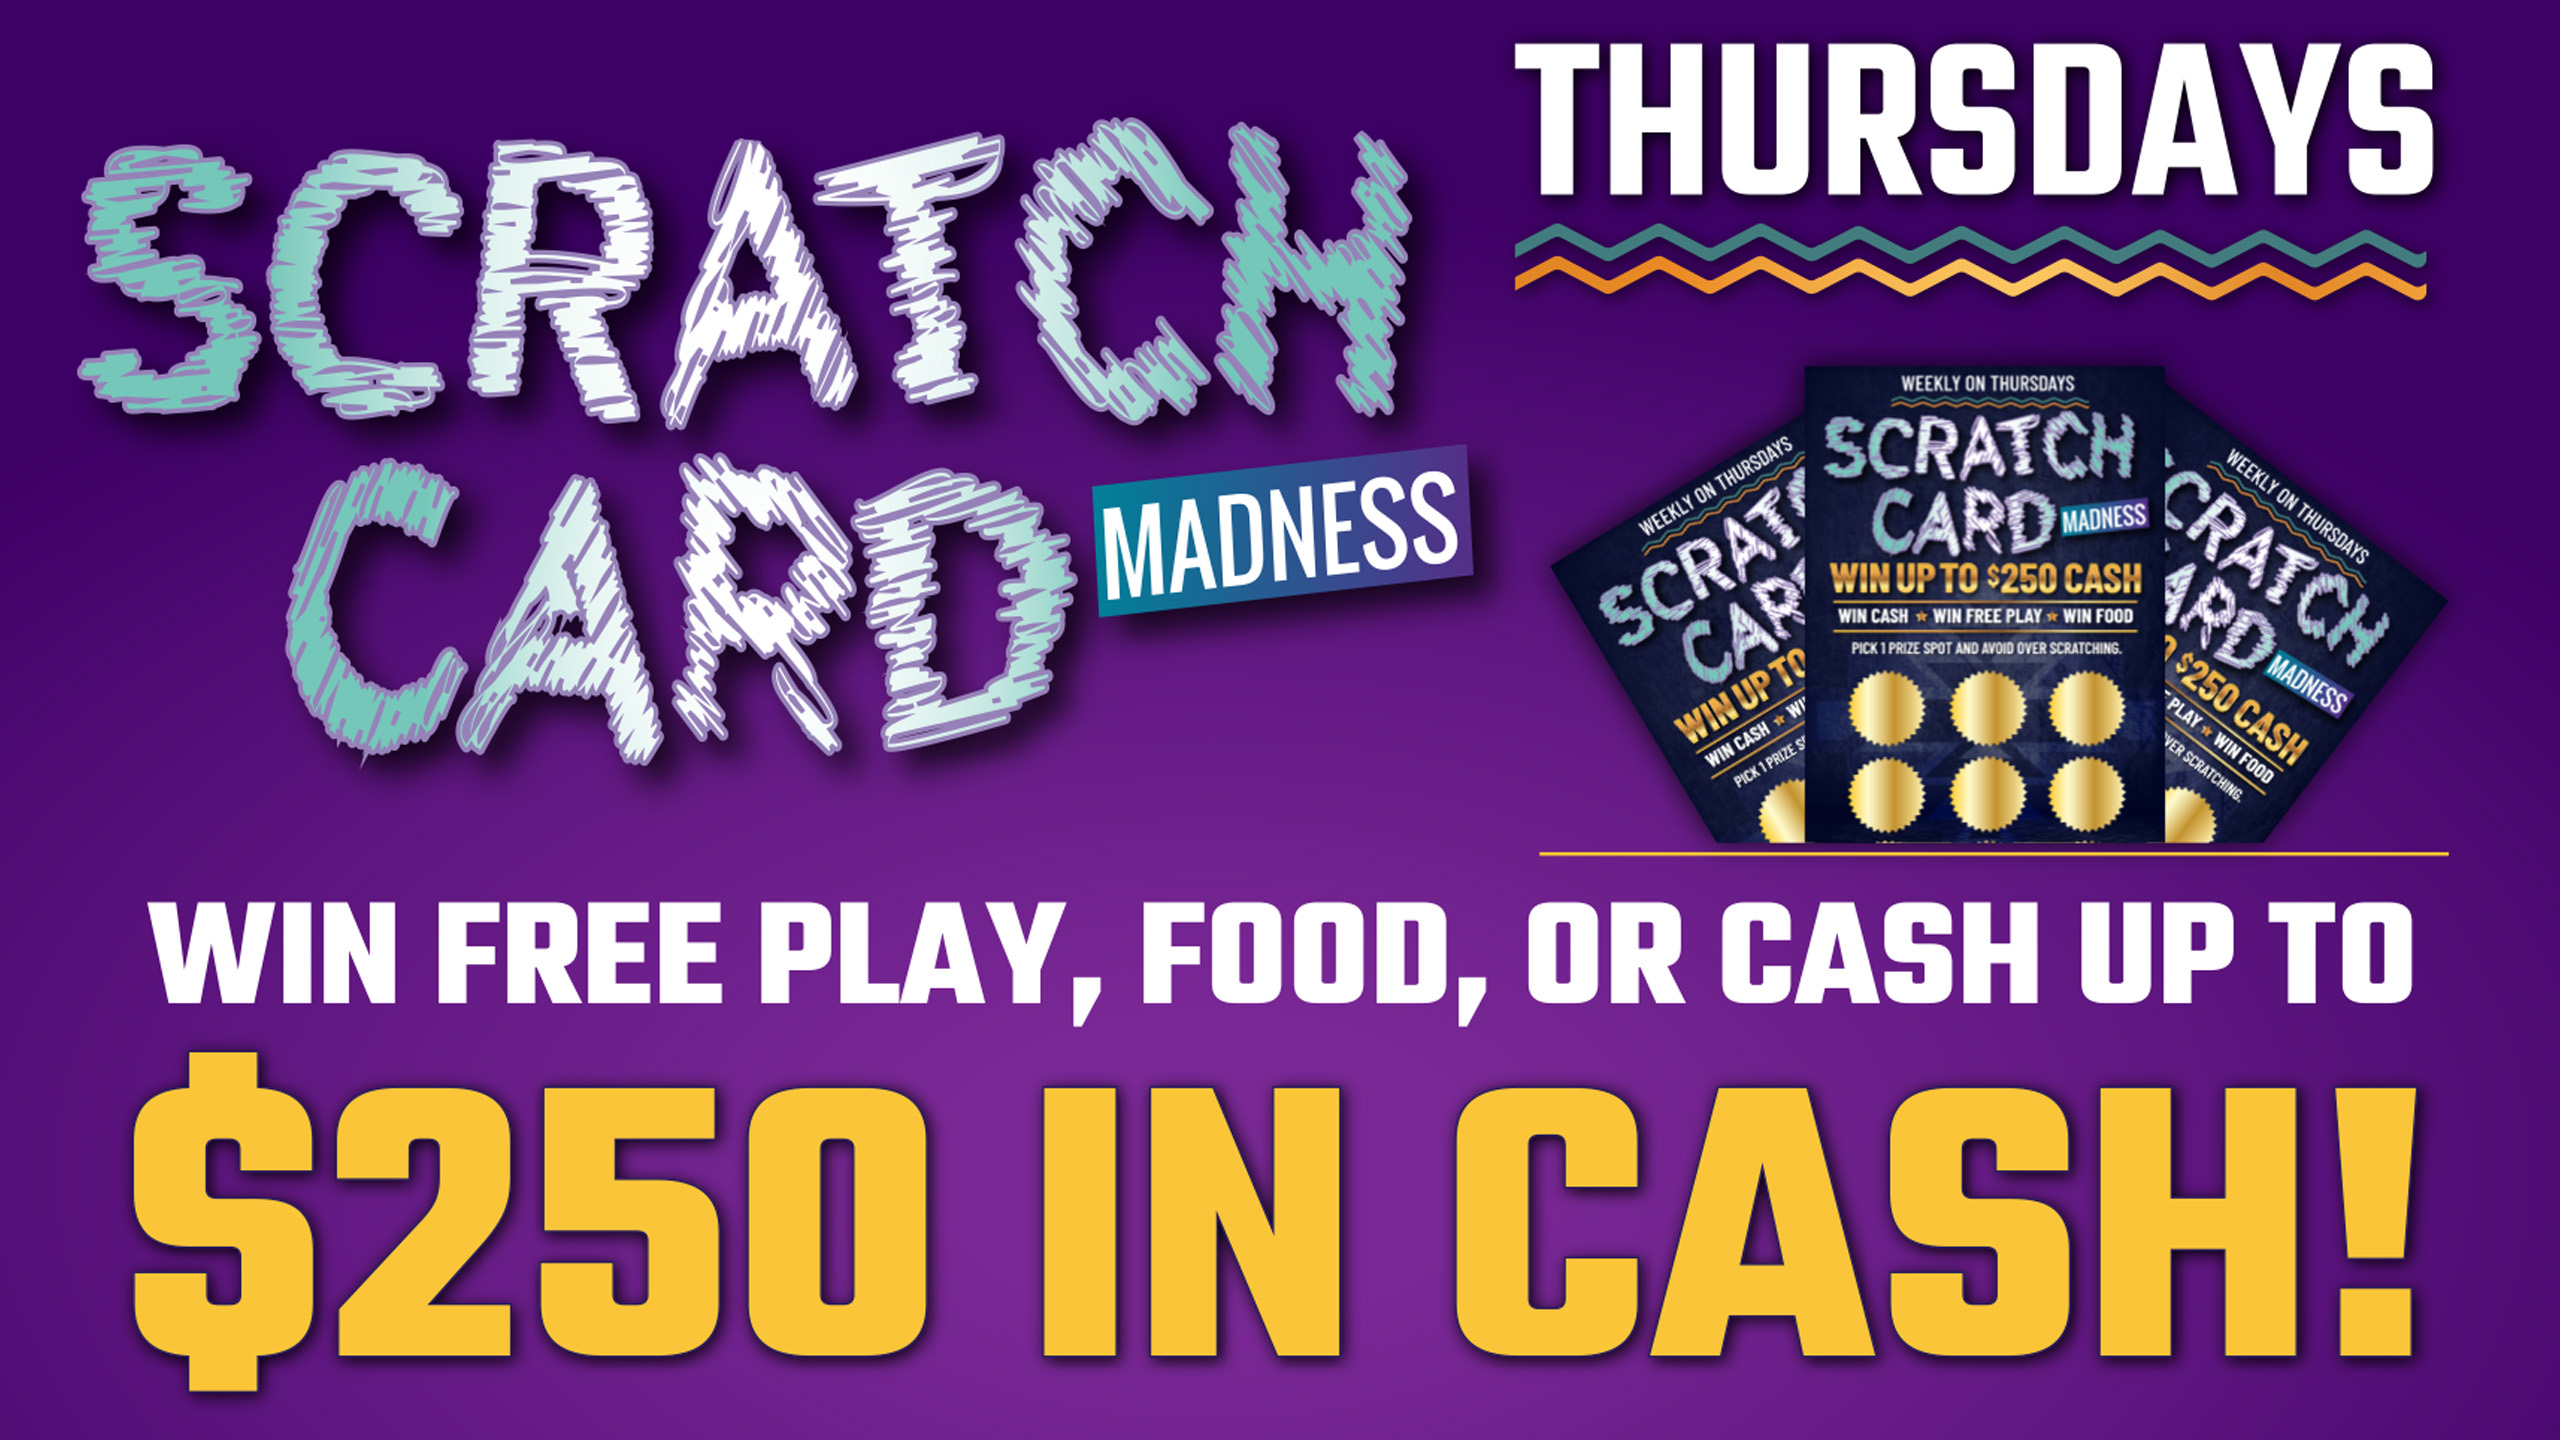 scratch card promotion at wanaaha casino in bishop